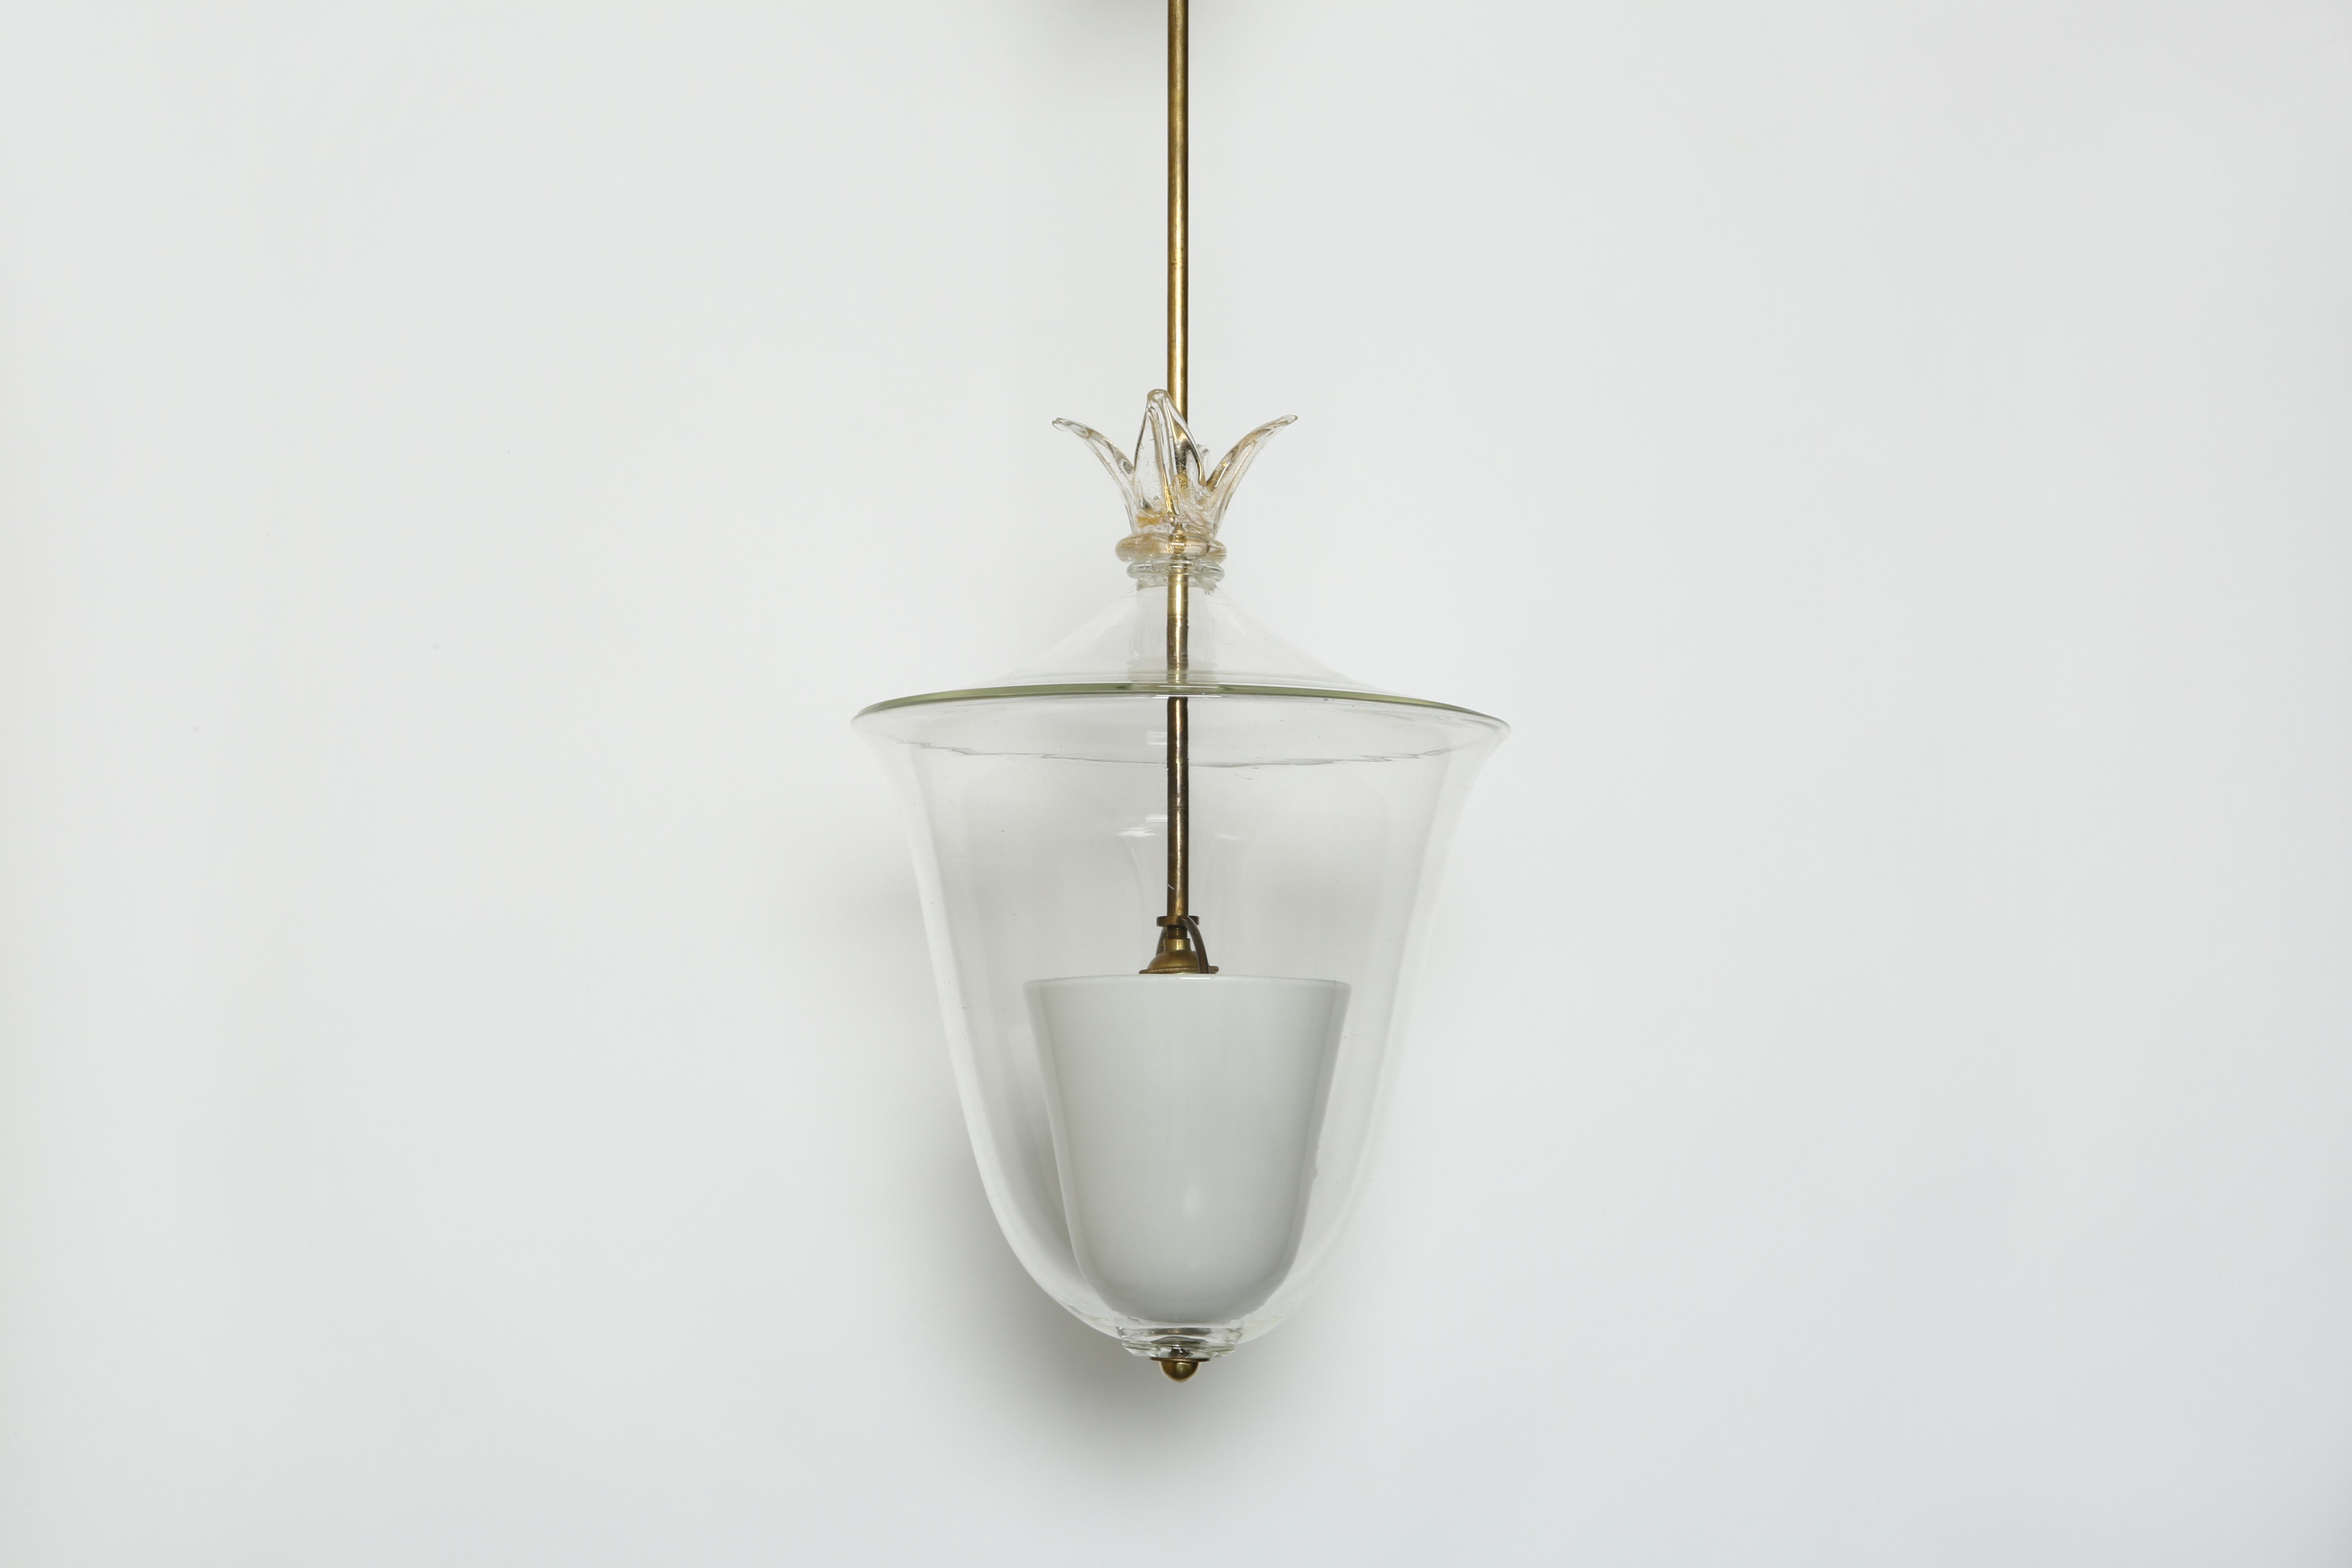 Archimede Seguso ceiling pendant.
Made in Italy in 1930s.
Hand blown glass.
  